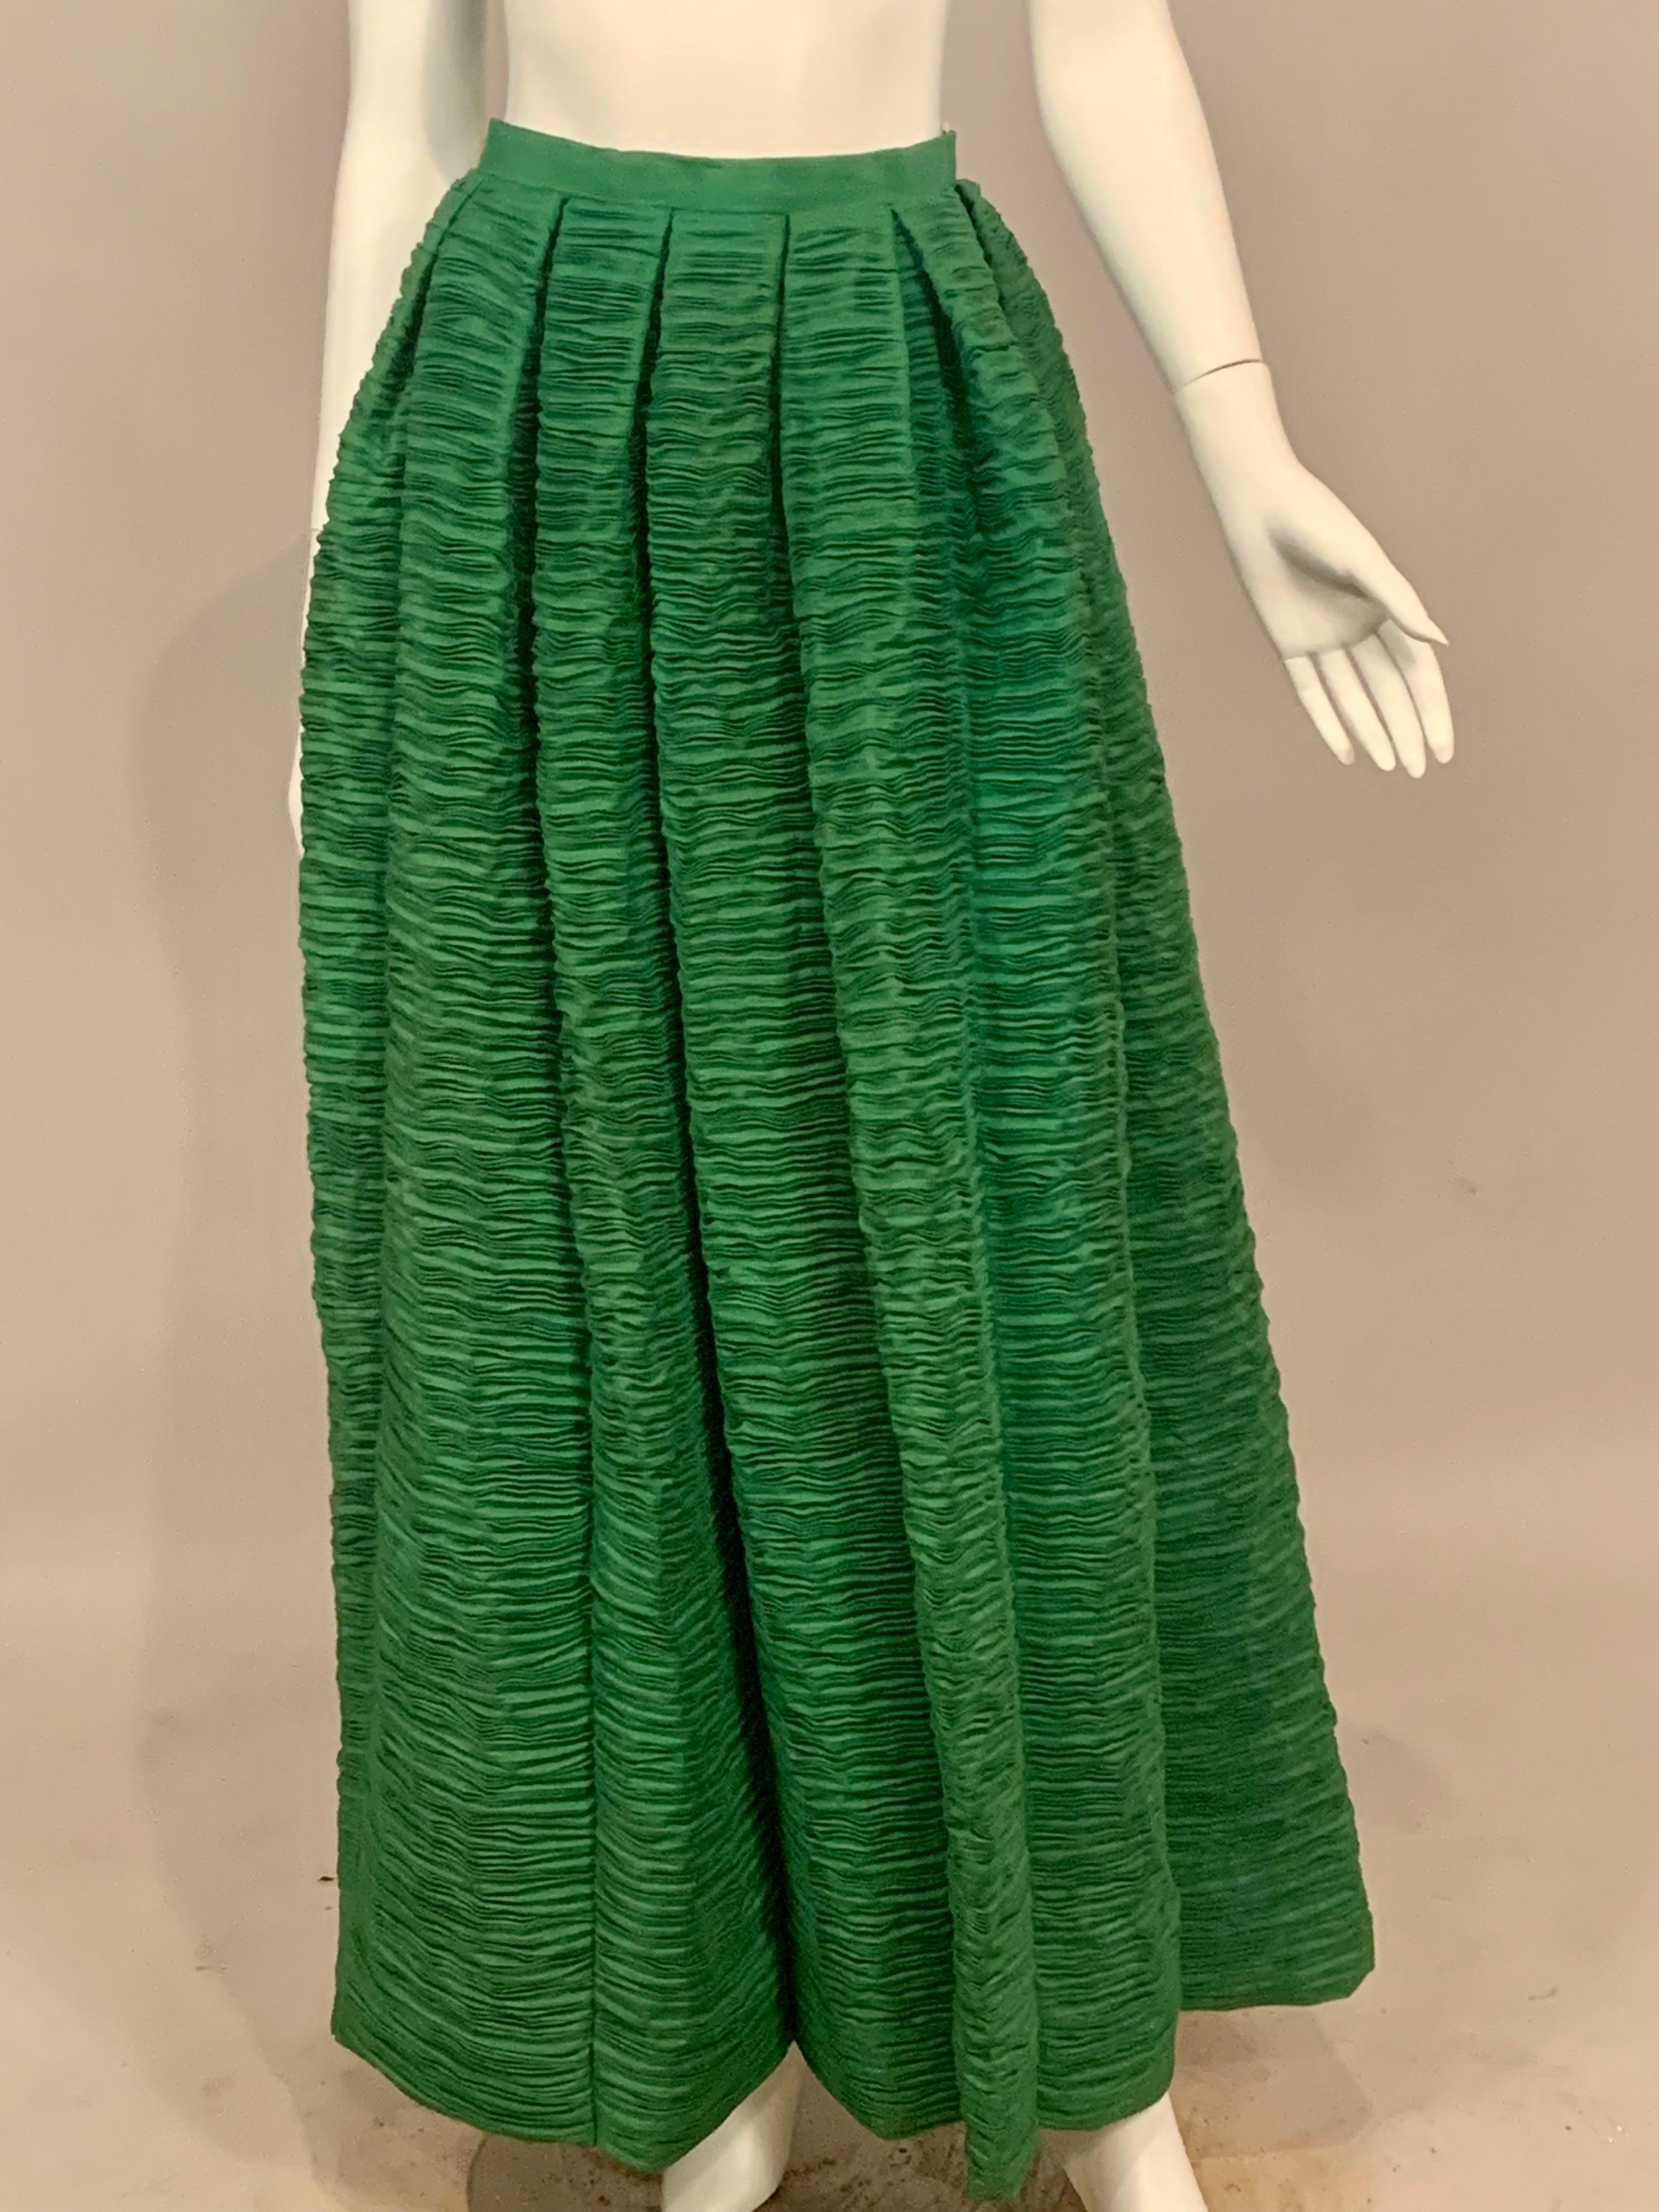 Known as the Irish Couturier, Sybil Connolly is most famous for her extremely rare pleated linen clothing. She used fabrics that were produced in Ireland almost exclusively, and the linen in this skirt is an example of the quality workmanship.  Each